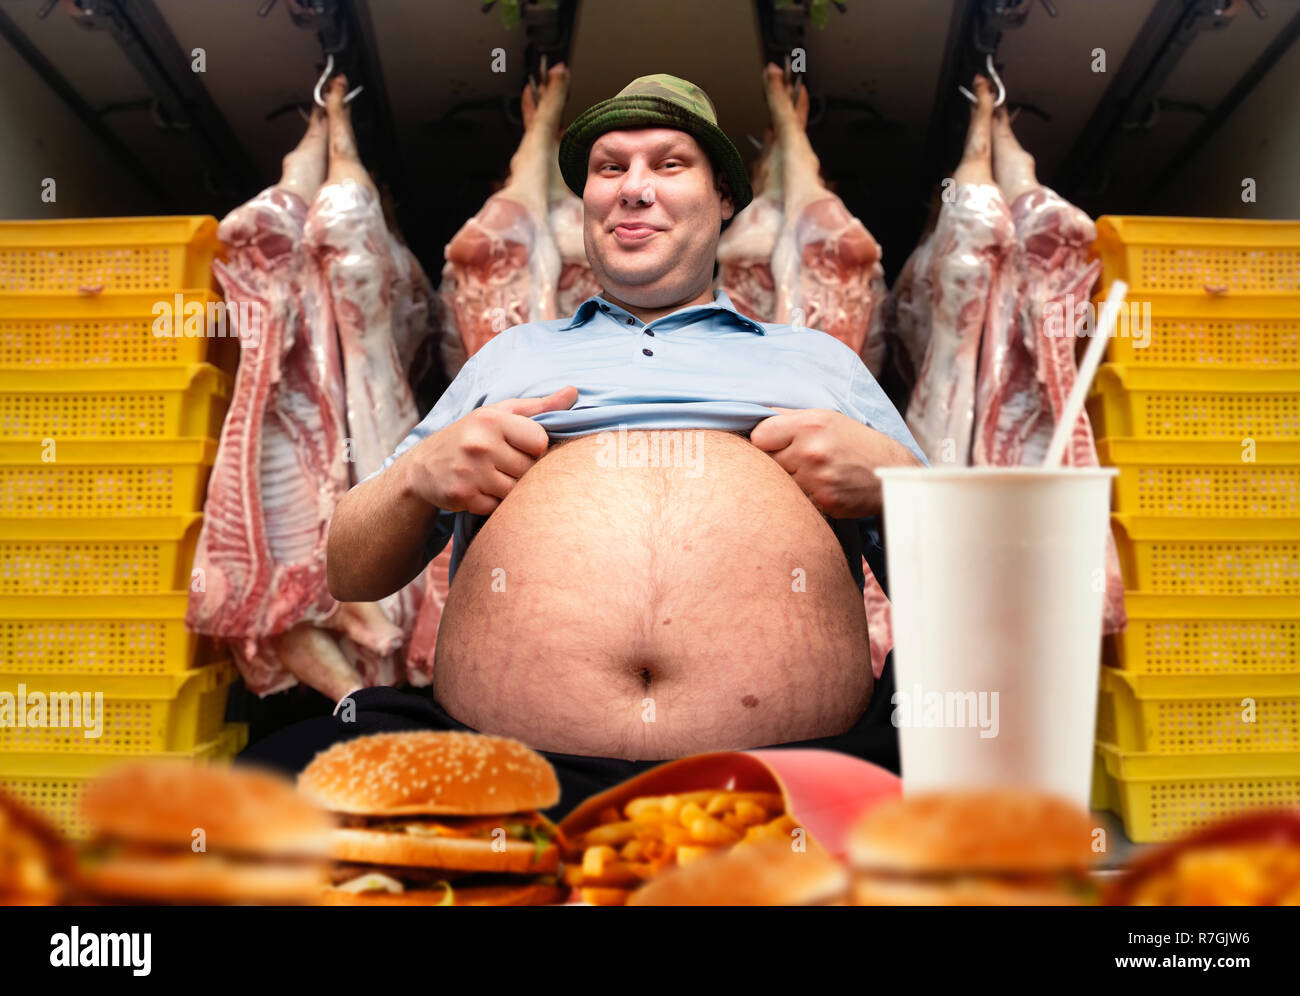 happy-fat-man-and-fast-food-pork-carcasses-on-background-overweight-people-burgers-eating-R7GJW6.jpg